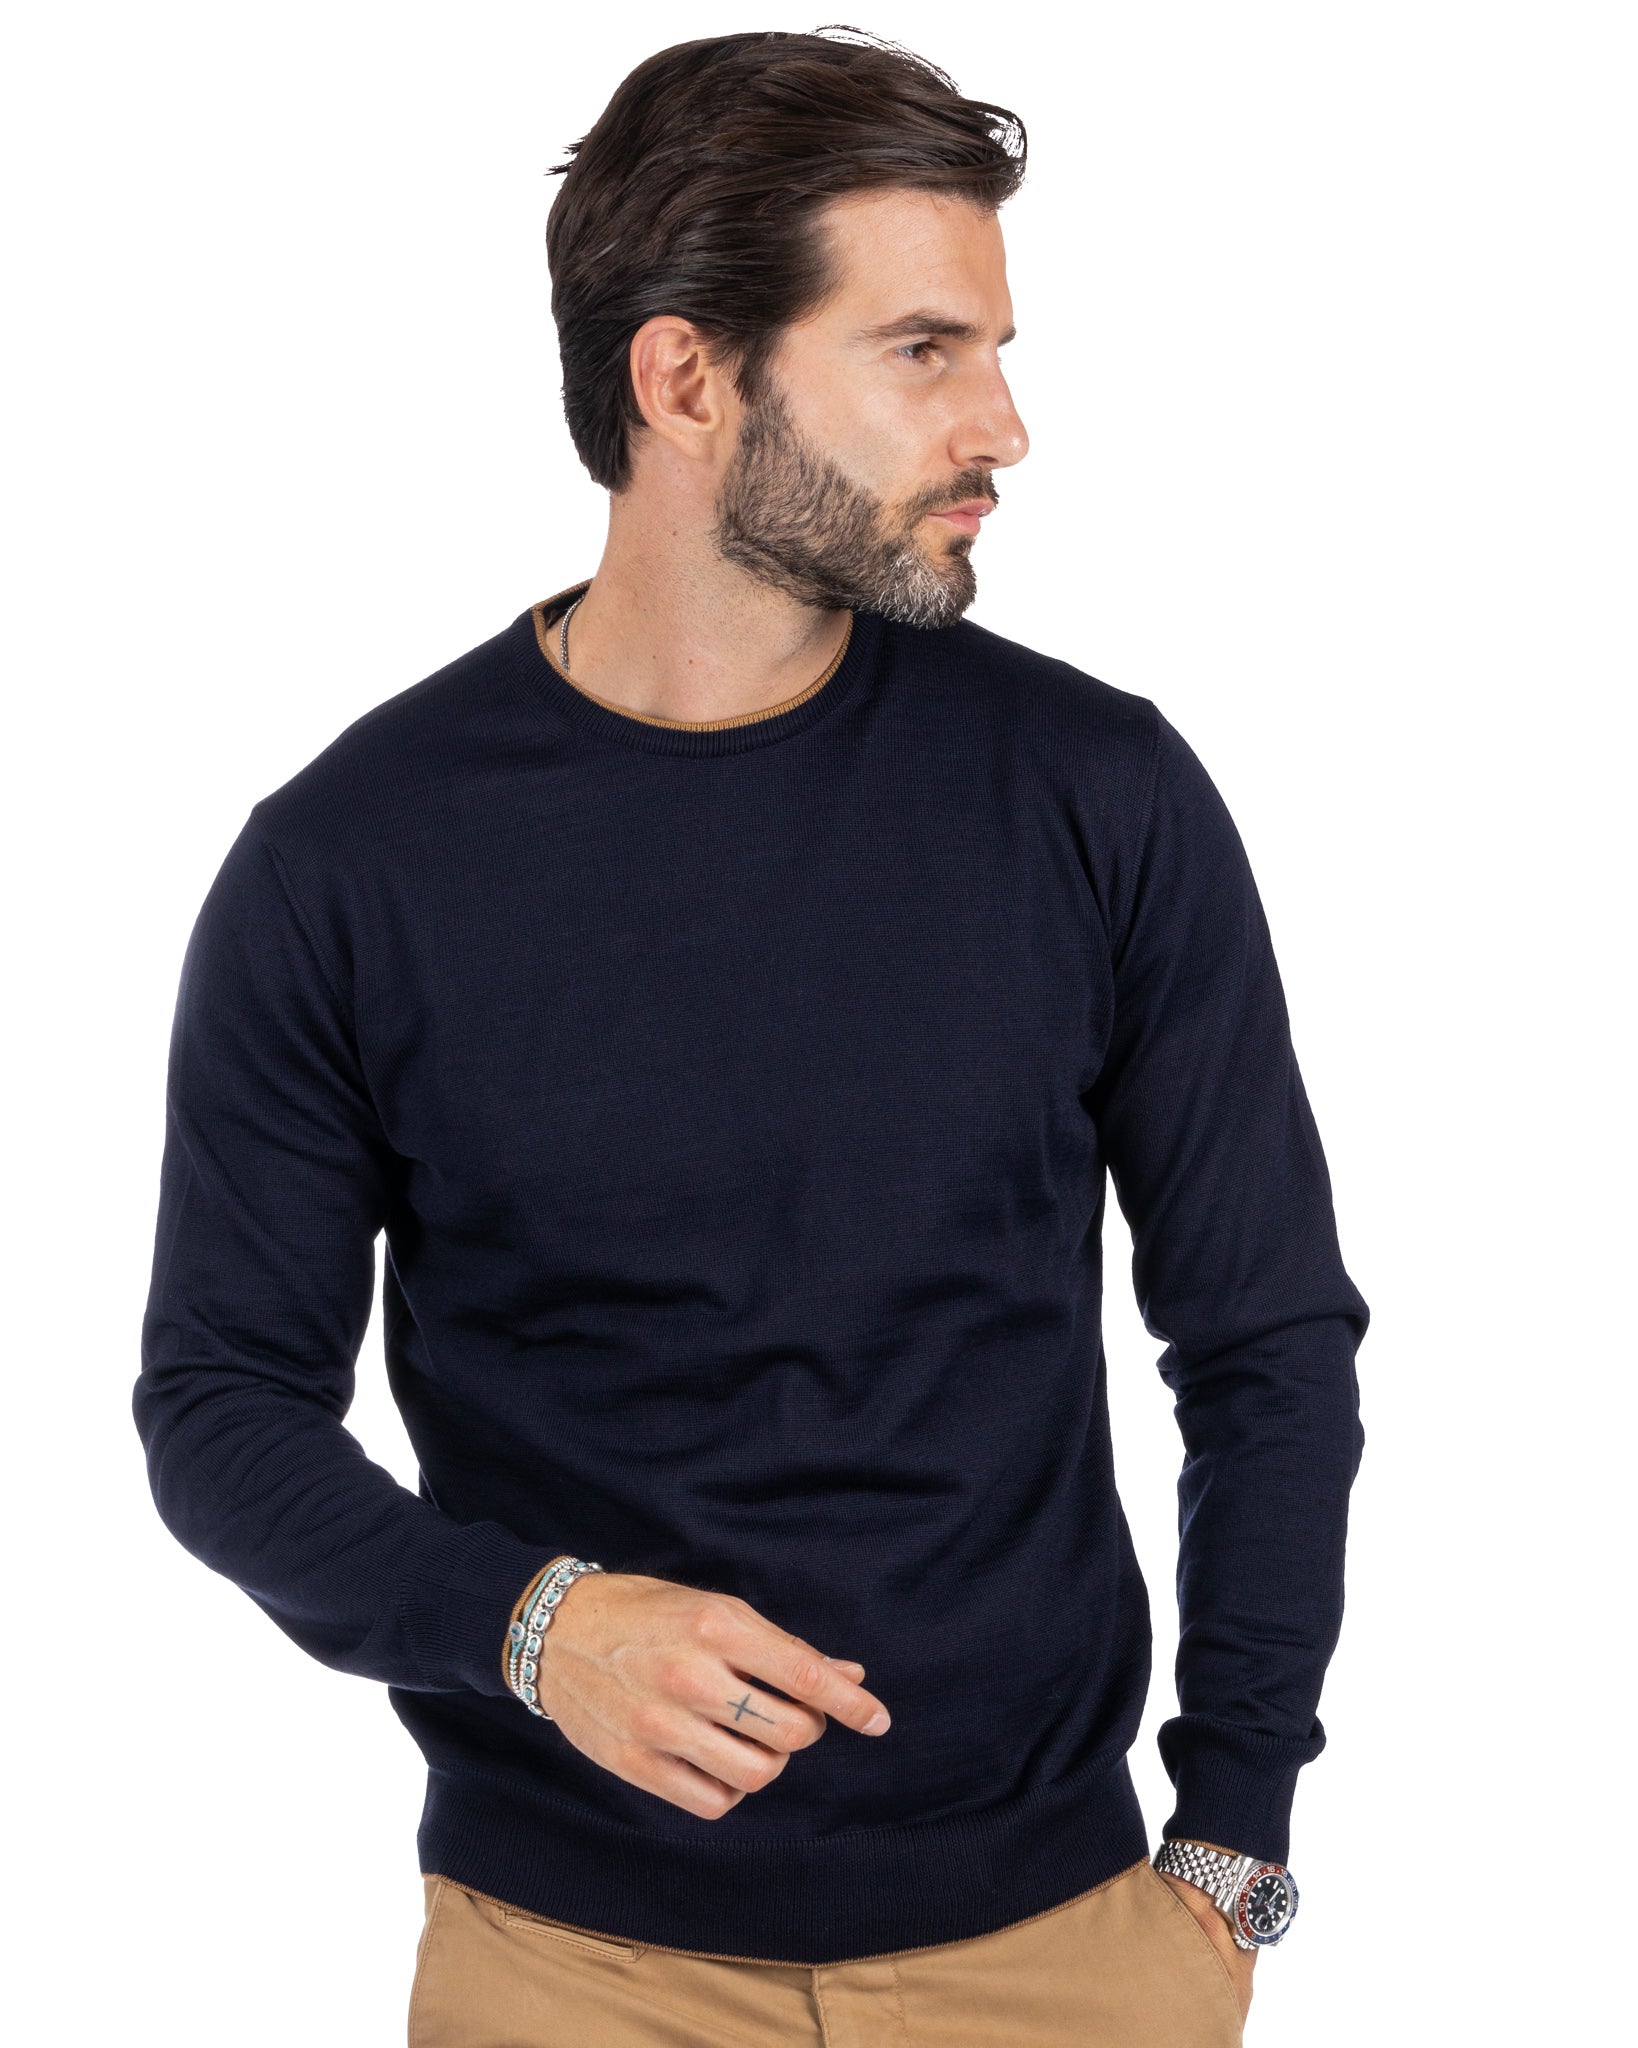 Seve - blue sweater with camel edge